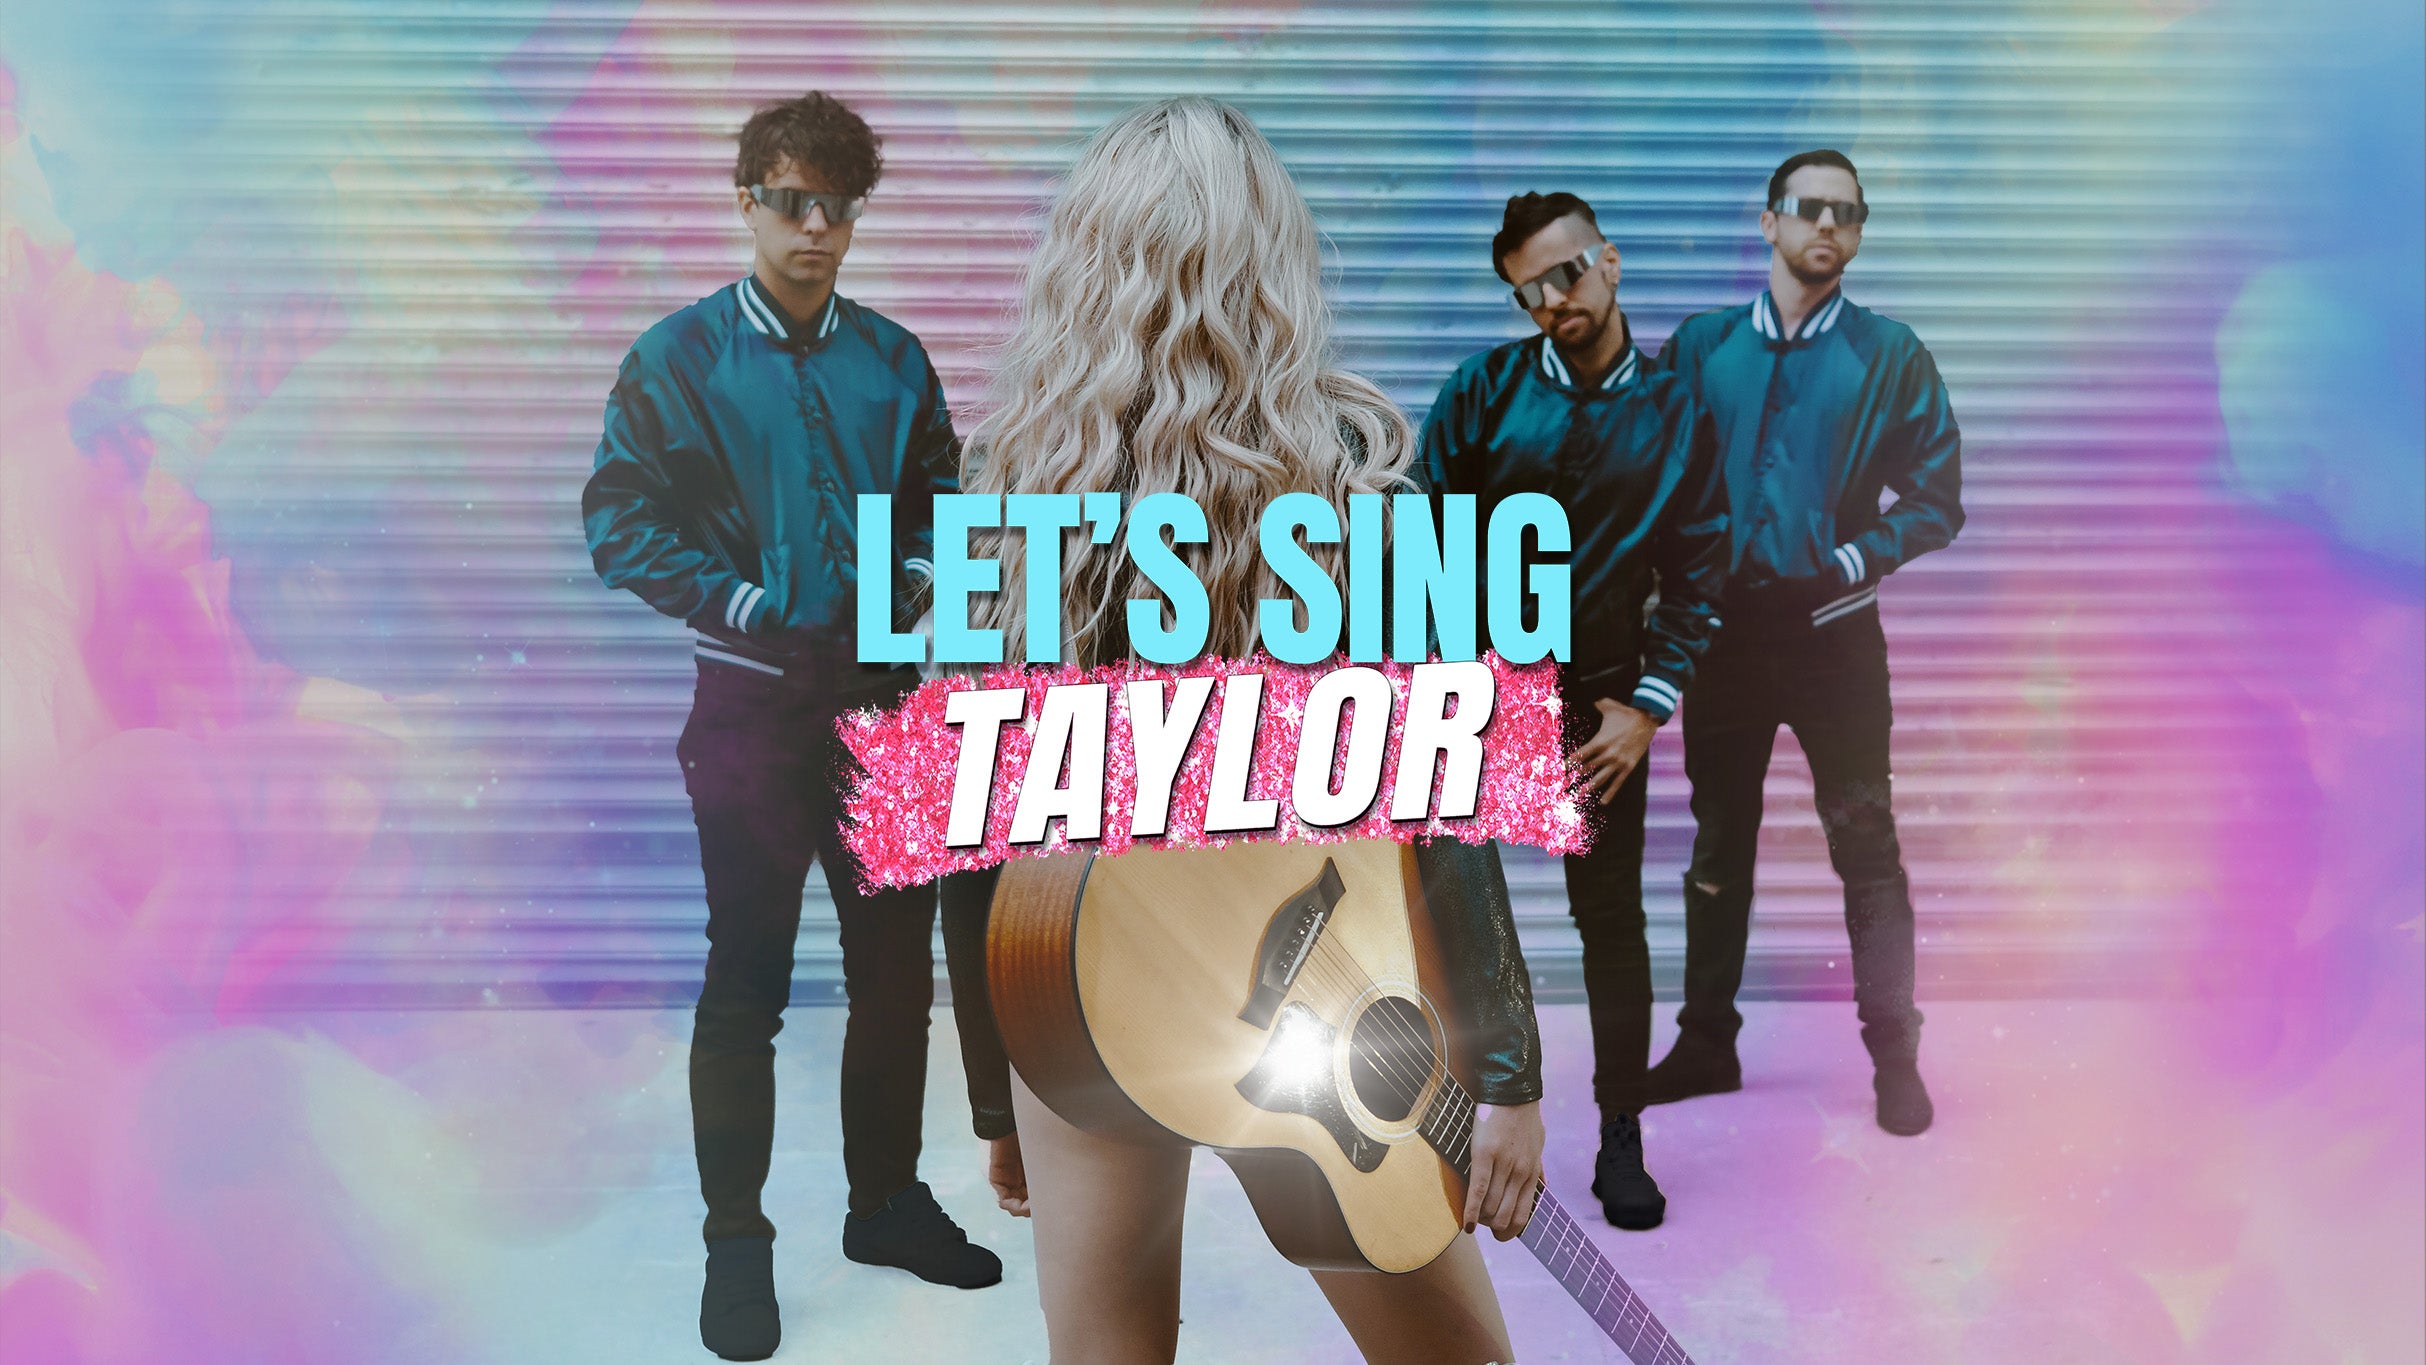 Let’s Sing Taylor - A Live Band Experience Celebrating Taylor Swift pre-sale password for show tickets in San Francisco, CA (Palace of Fine Arts)